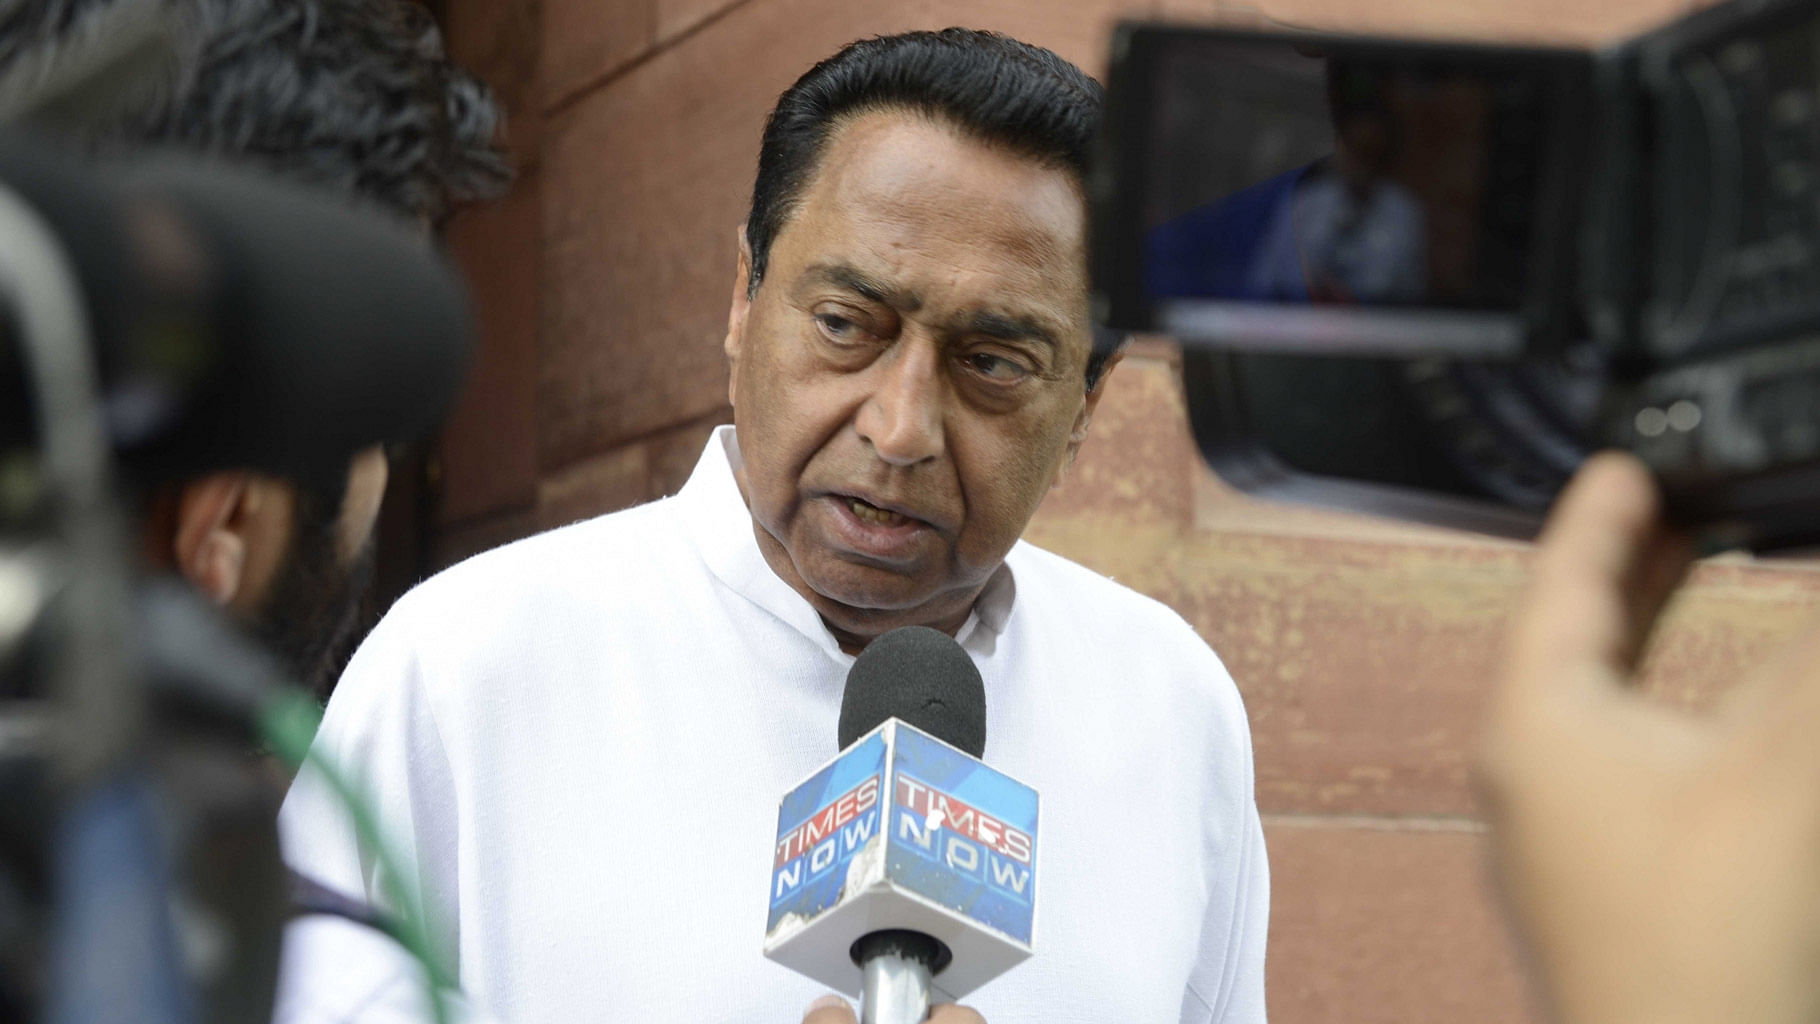 Senior Congress leader Kamal Nath was allegedly involved in the 1984 anti-sikh riots. (Photo: IANS)